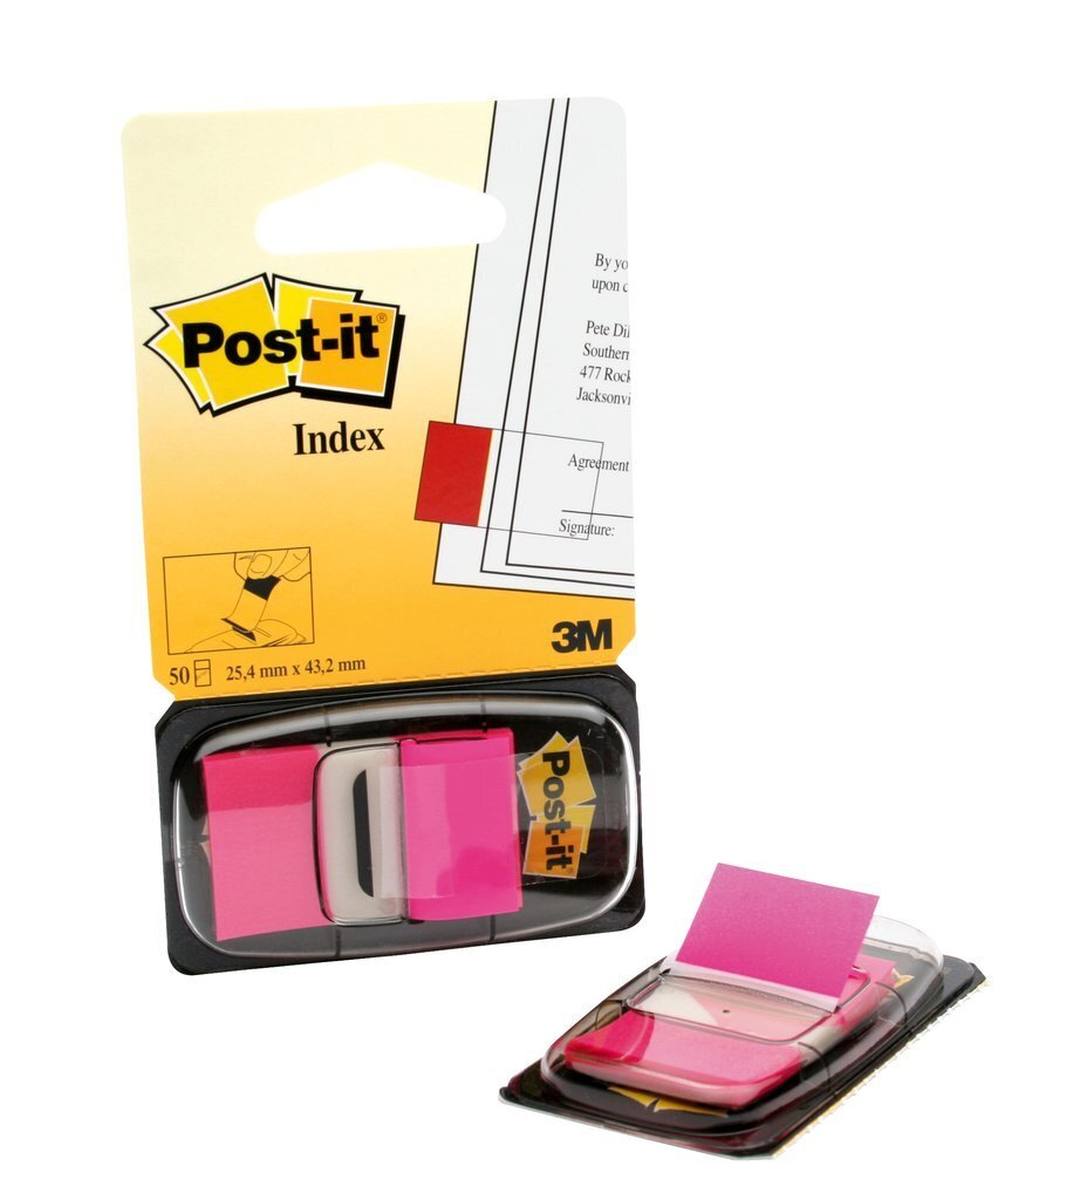 3M Post-it Index I680-21, 25.4 mm x 43.2 mm, pink, 1 x 50 adhesive strips in dispenser